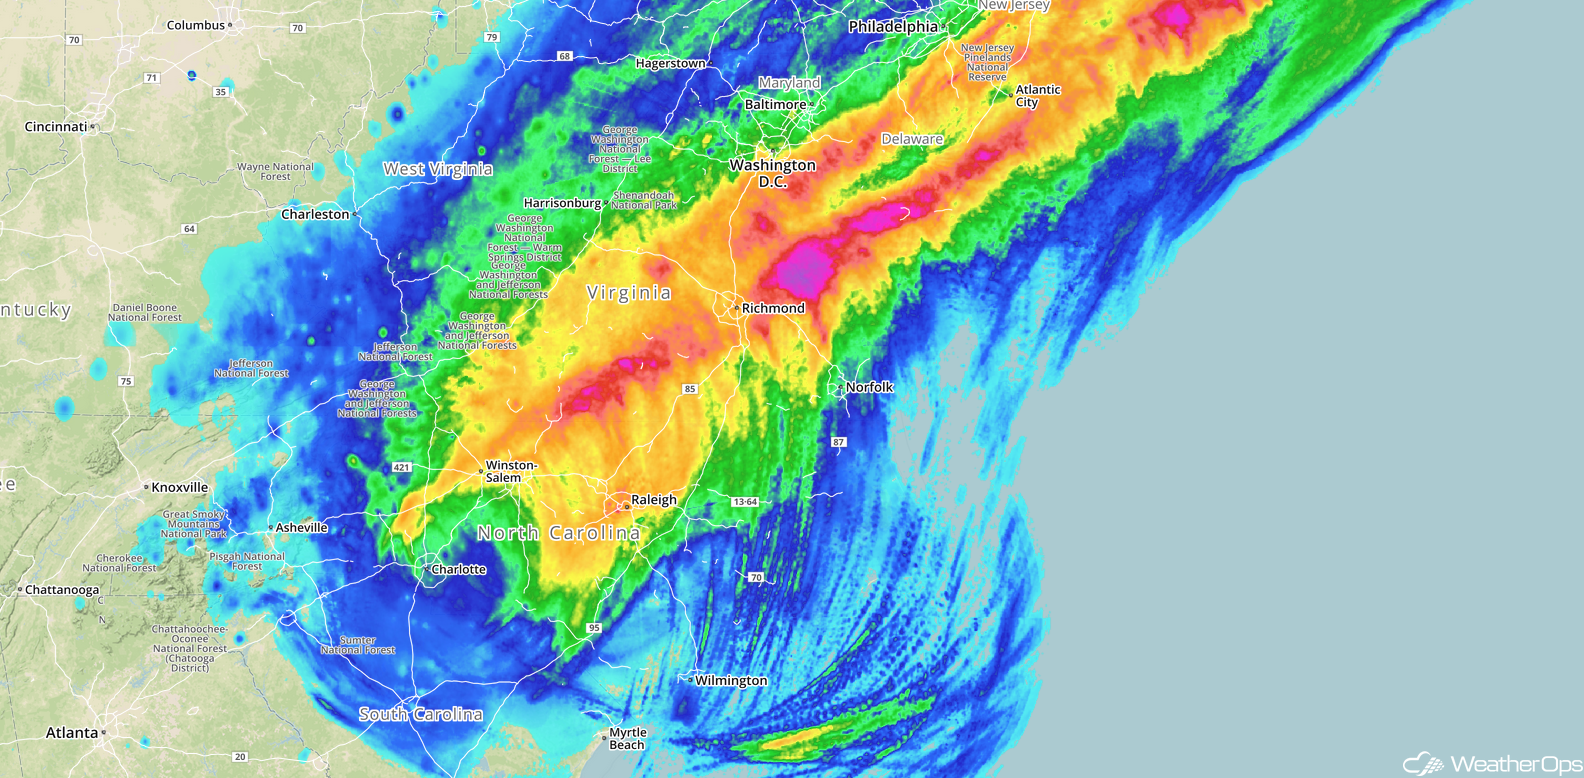 24 Hour Rainfall for the Carolinas ending at Noon EDT October 12